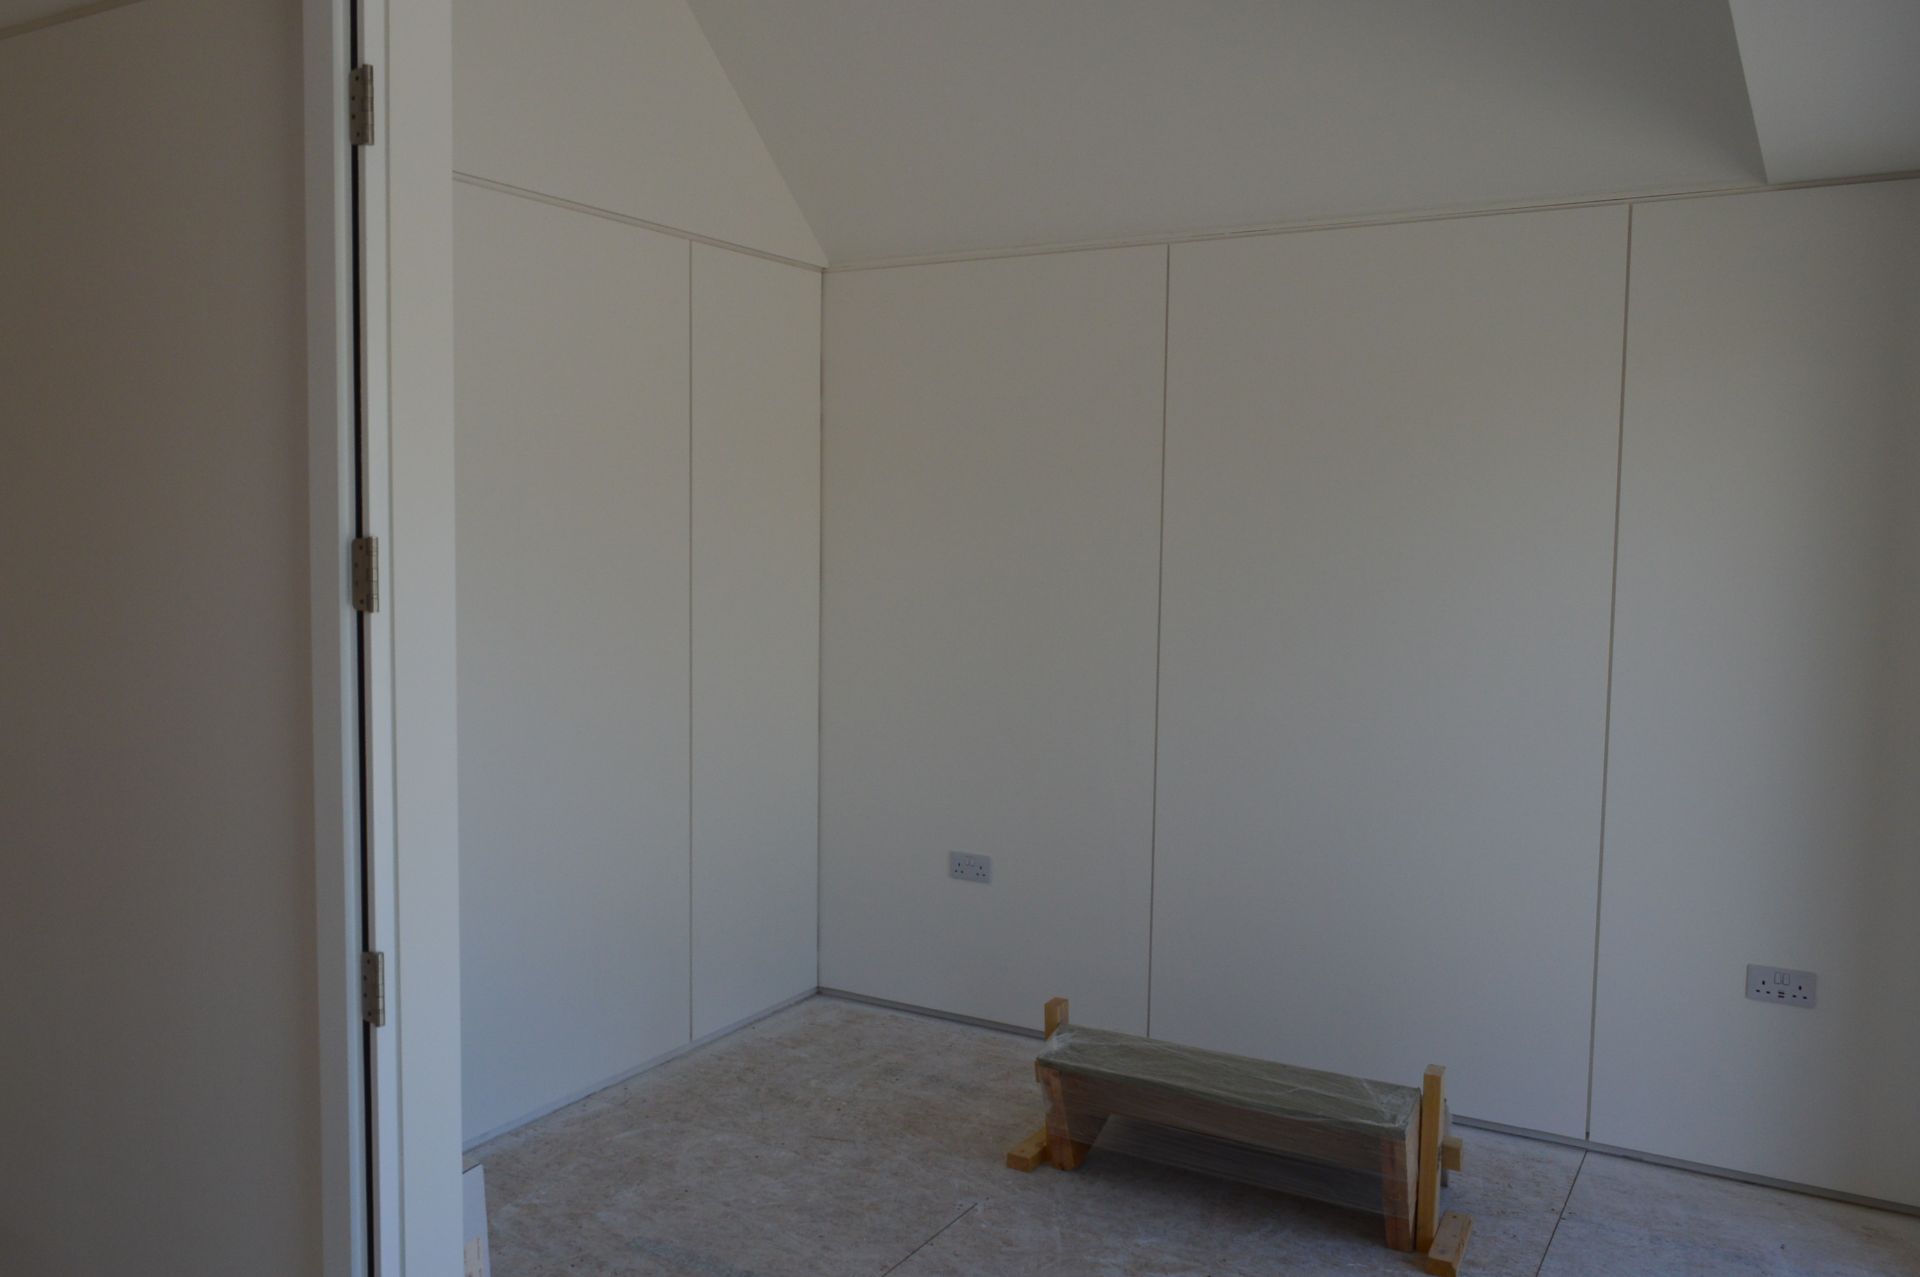 Housing pod with two bedrooms, fitted bathroom, water heater, heaters and balcony, approx. 10.7m x - Image 5 of 8